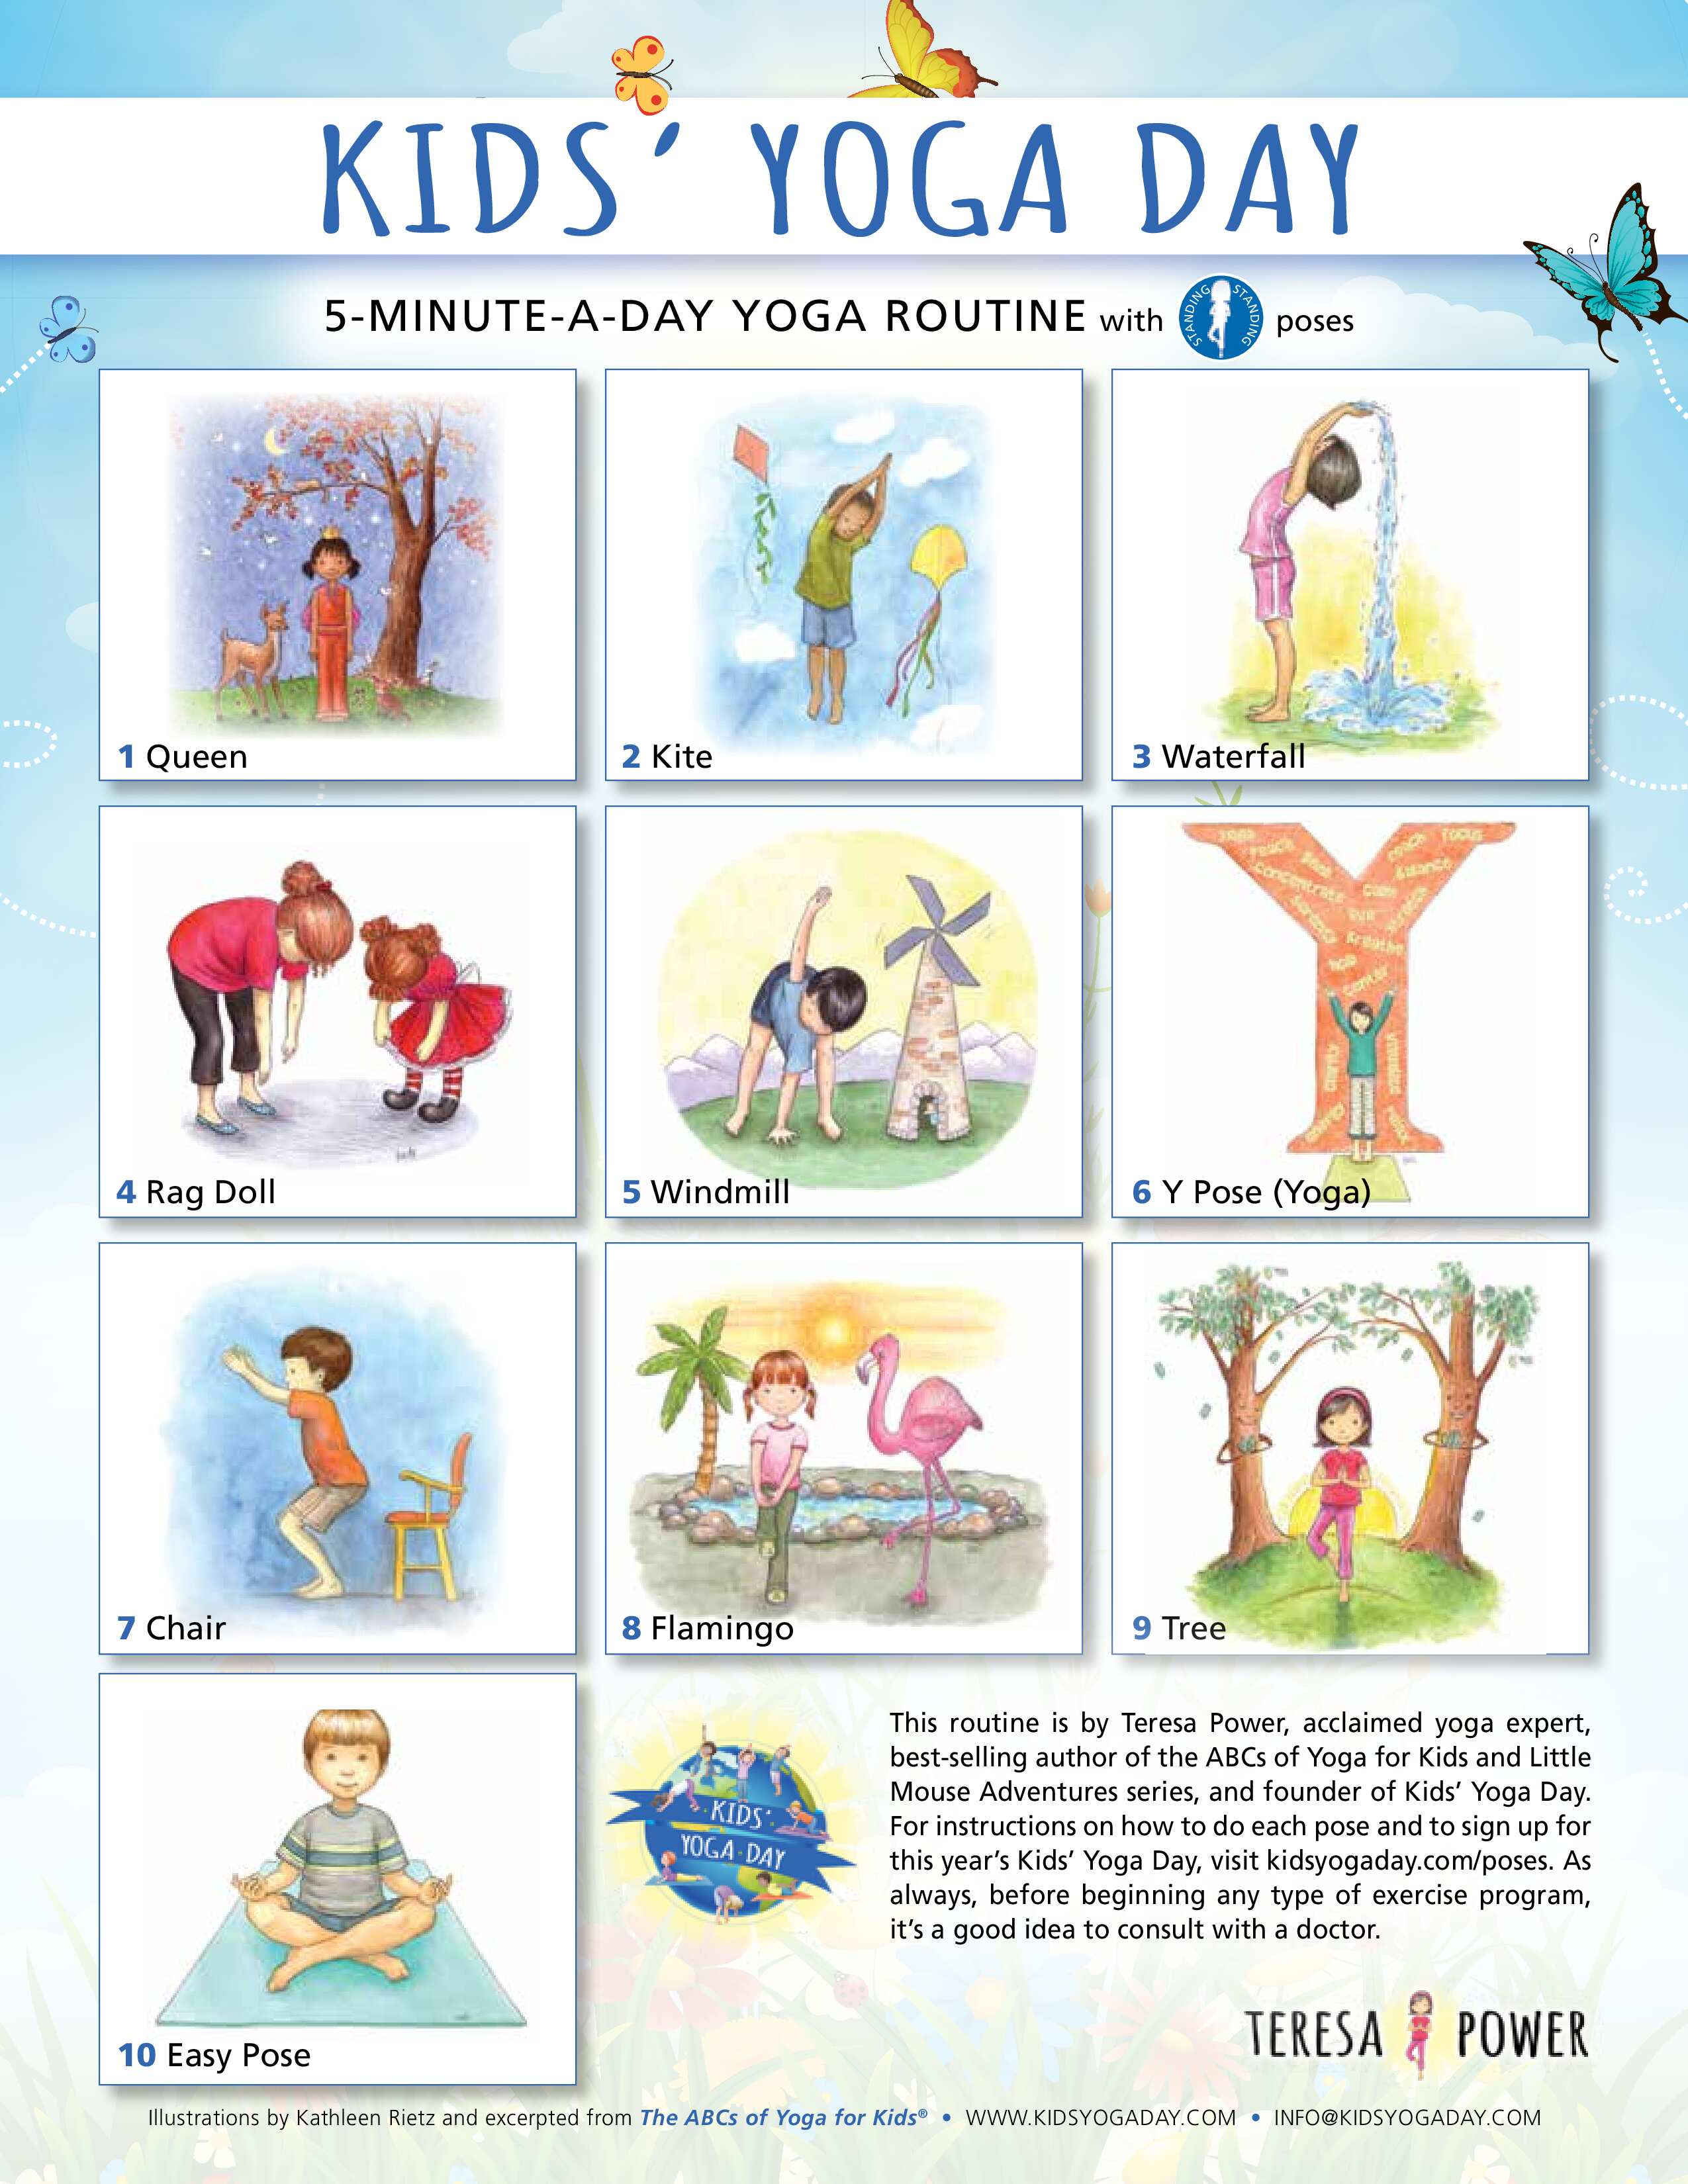 Easy Yoga Poses for Kids | Standing Poses | The Yoga Guppy Asana Series -  YouTube